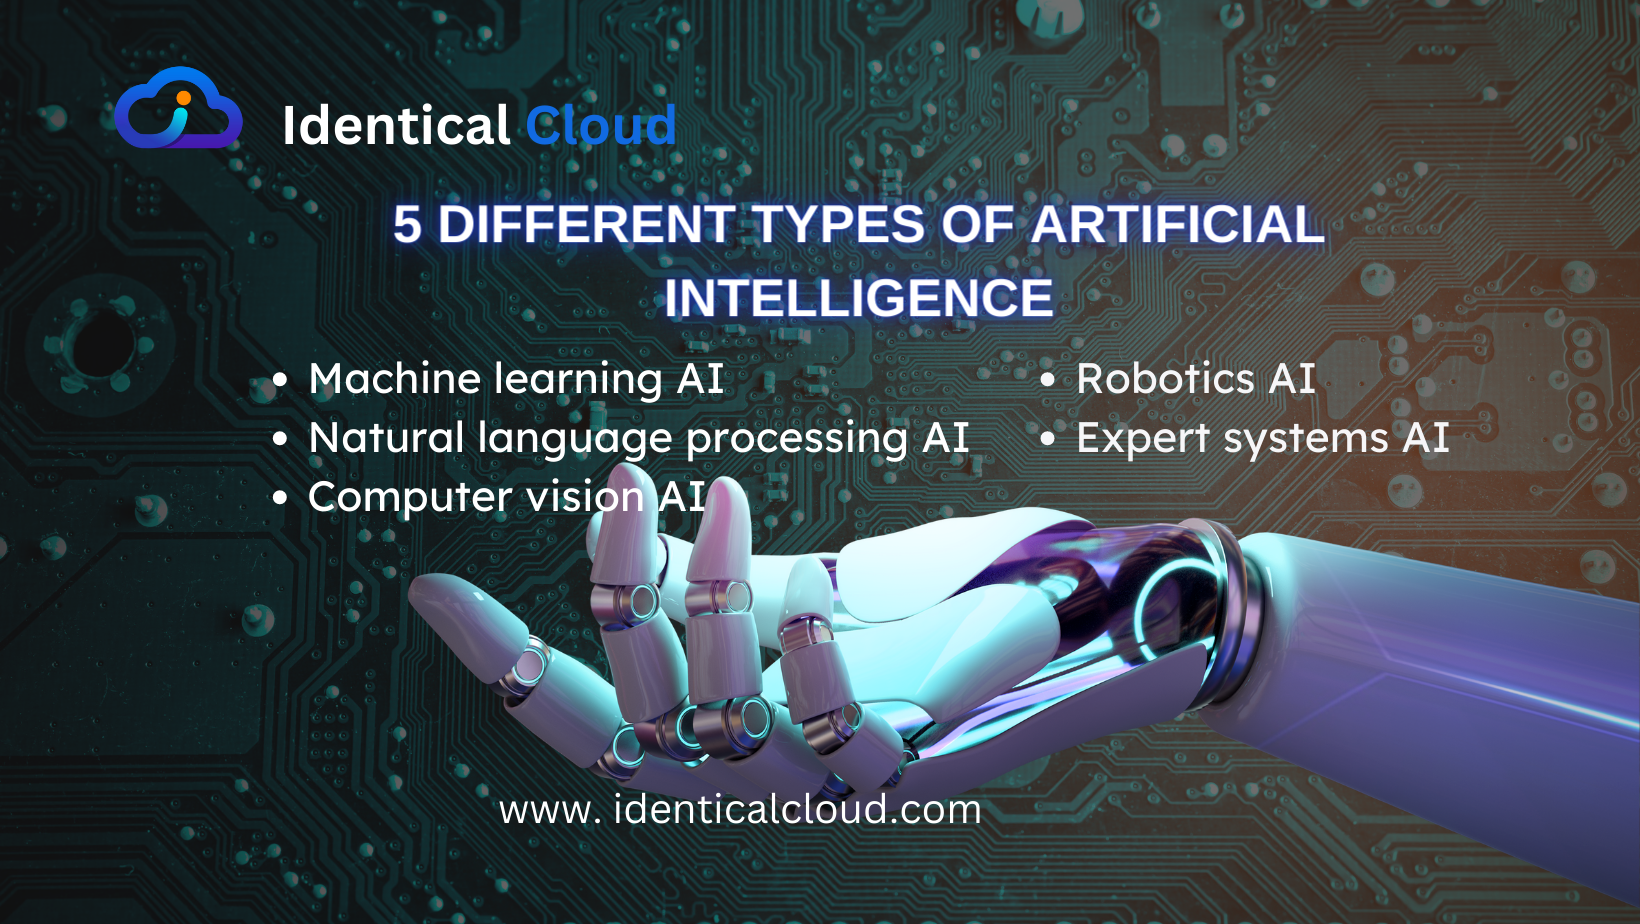 5 Different Types of Artificial Intelligence - identicalcloud.com